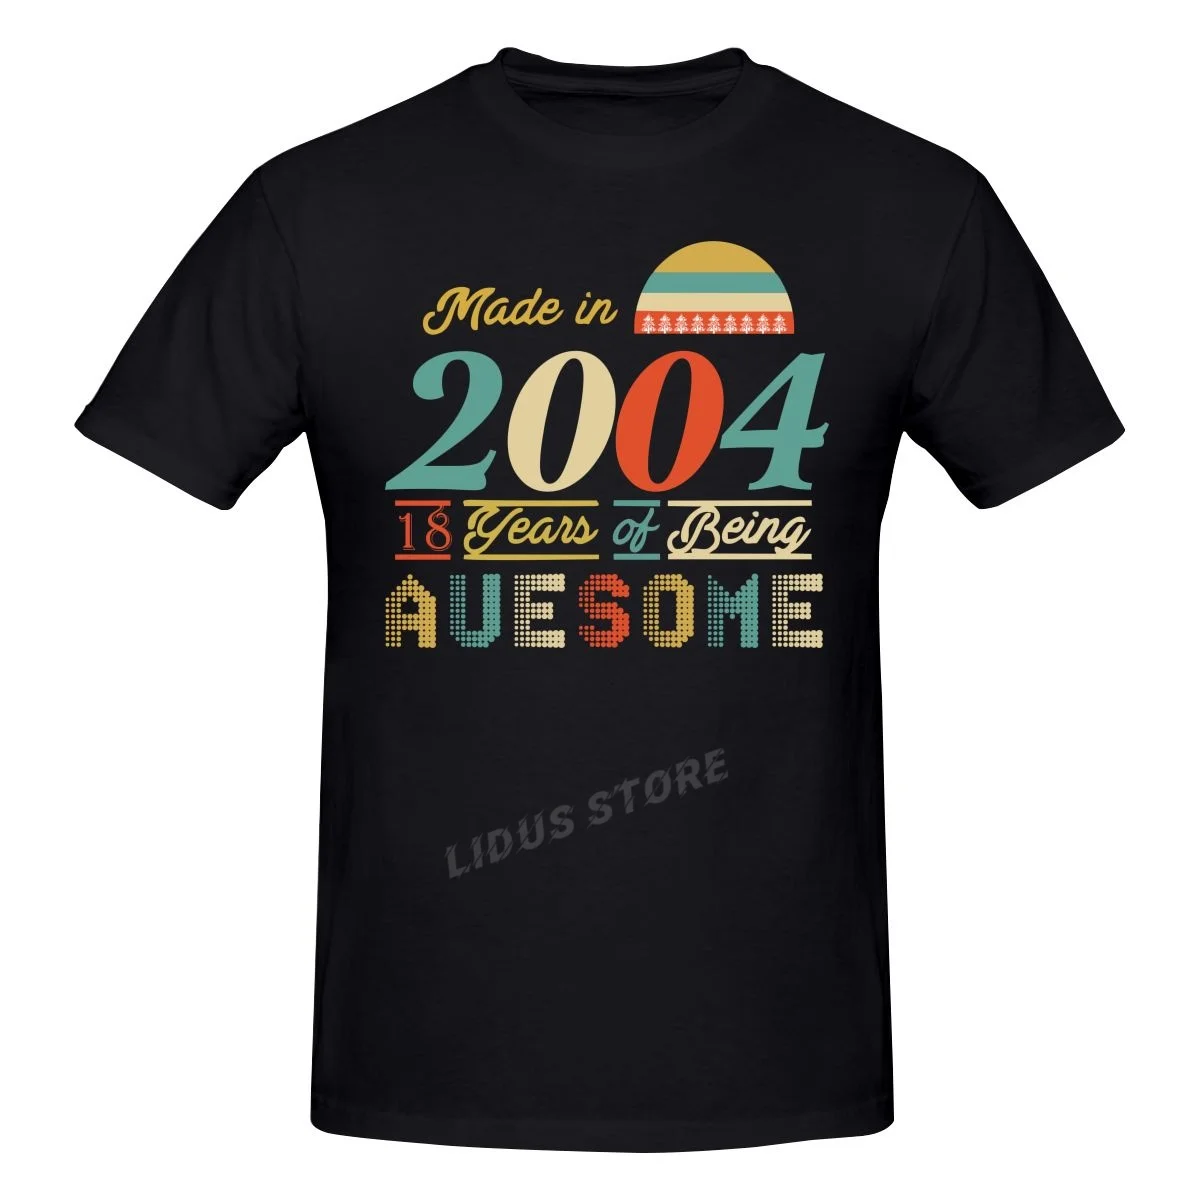 

2022 New Design Made In 2004 T-shirts 18 Years Of Being Awesome 18th Birthday T Shirt Gift Tshirt Cotton Tees Streetwear Unisex